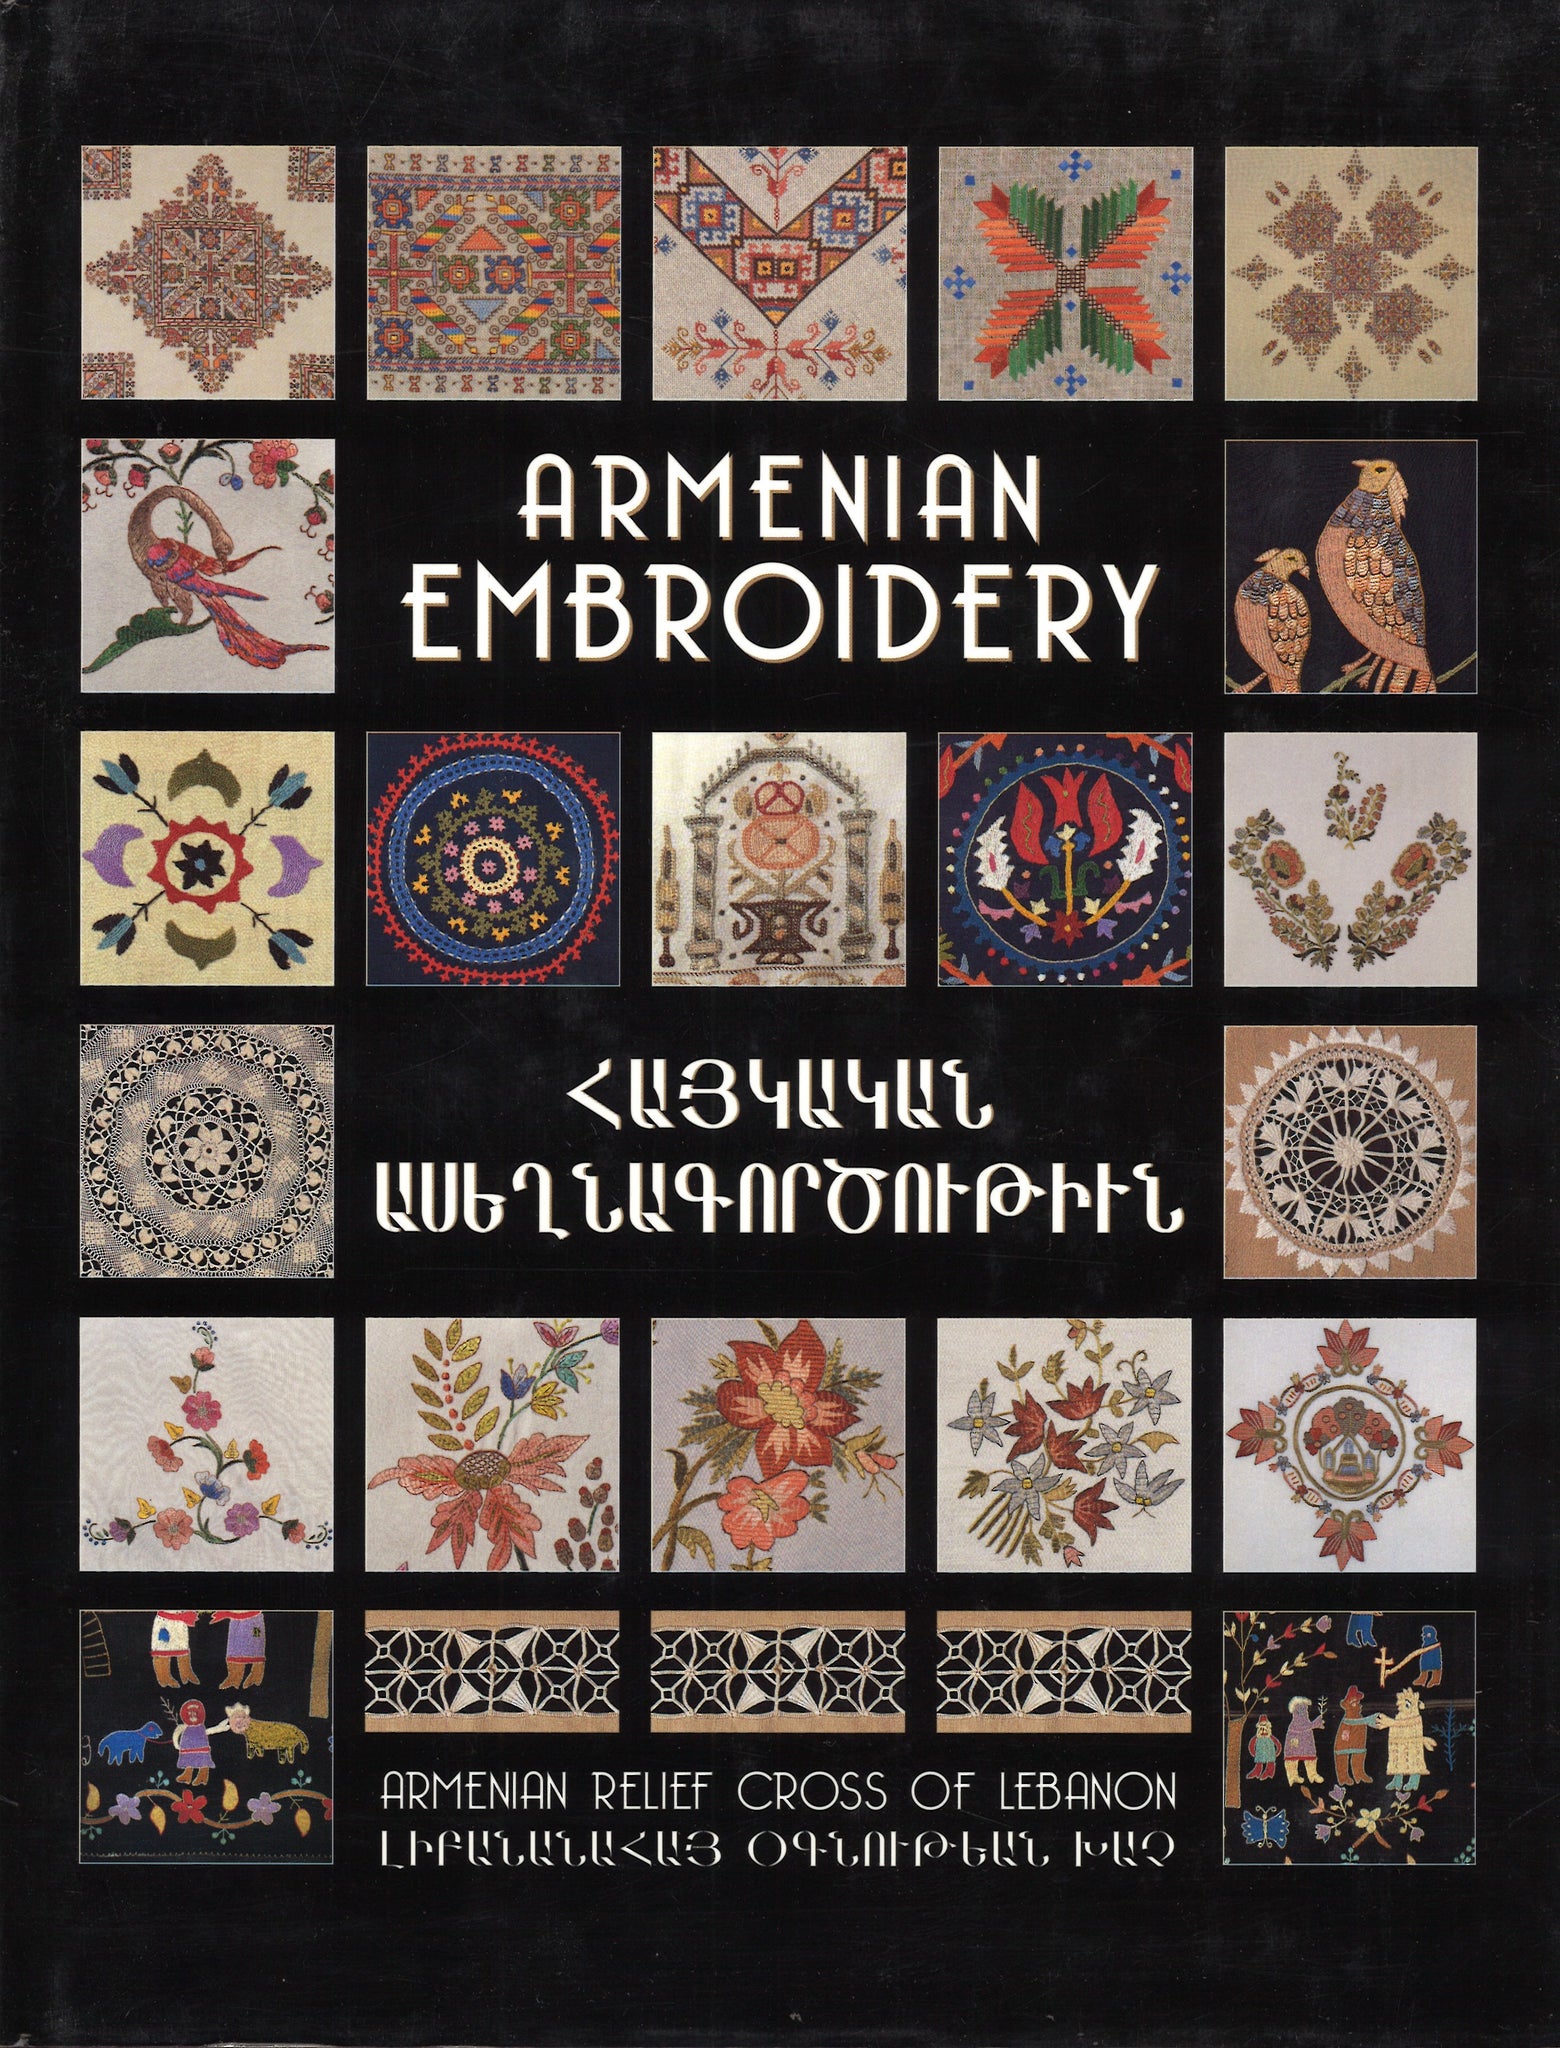 ARMENIAN EMBROIDERY: Echoes from the Past